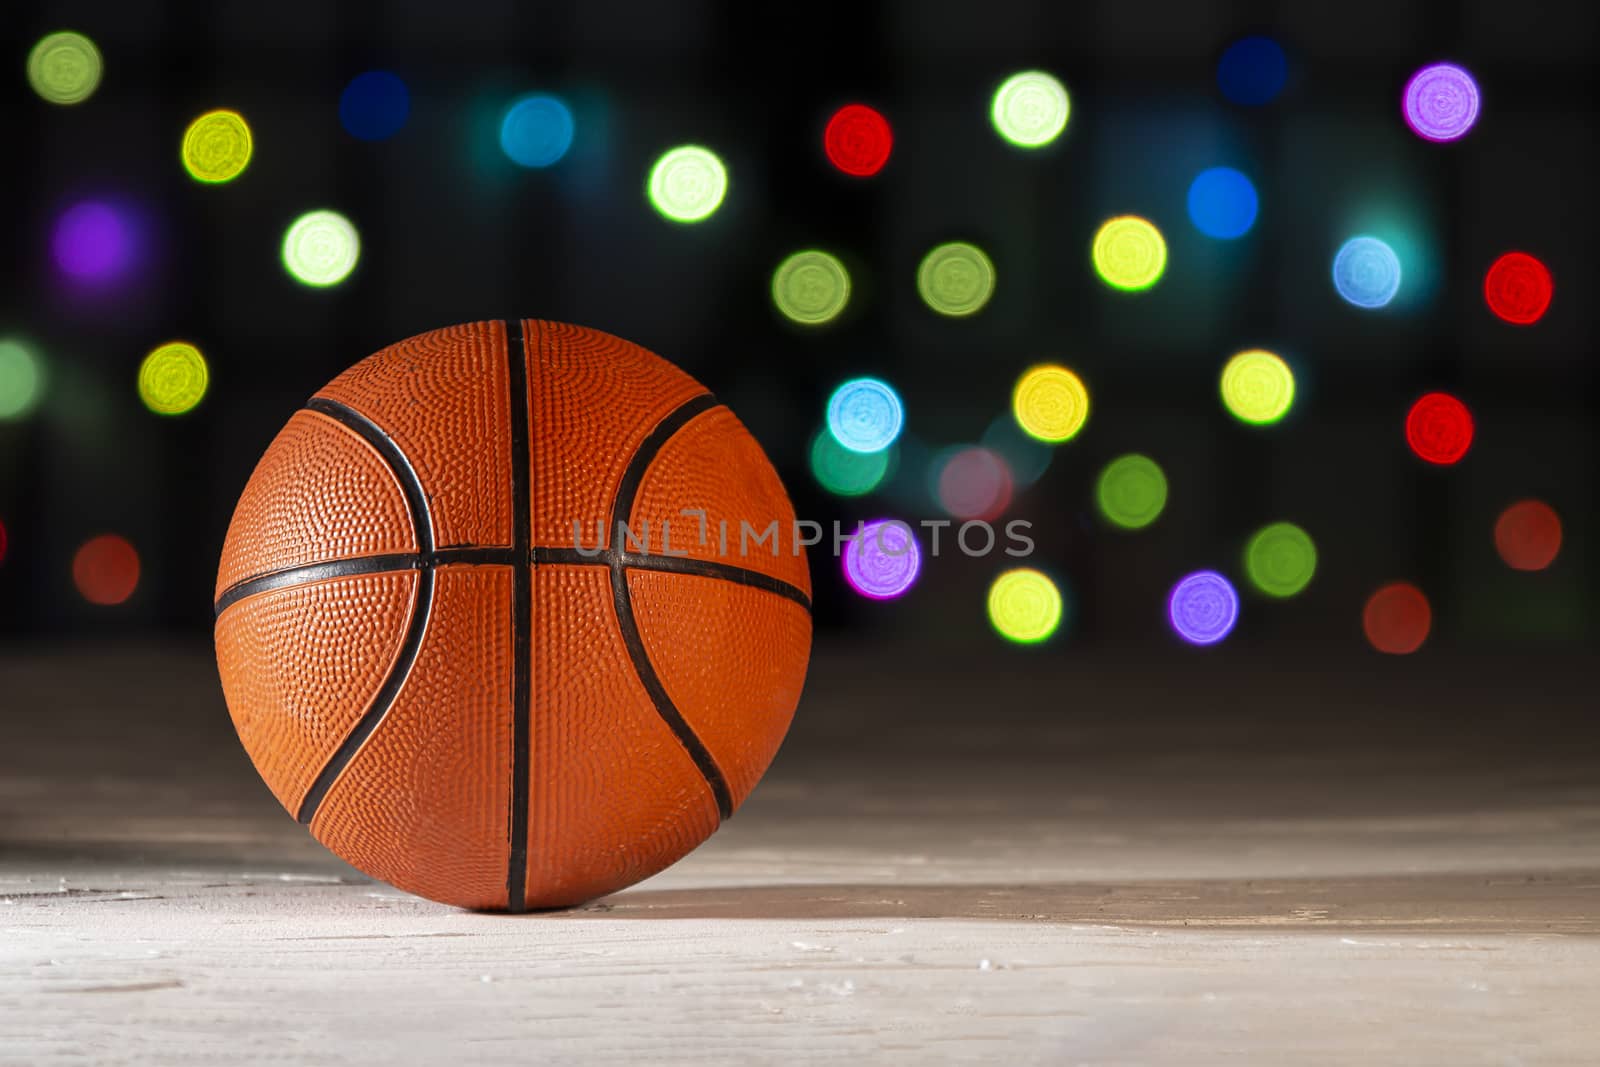 Basketball on a texture surface with defocus colourful lights on the background.